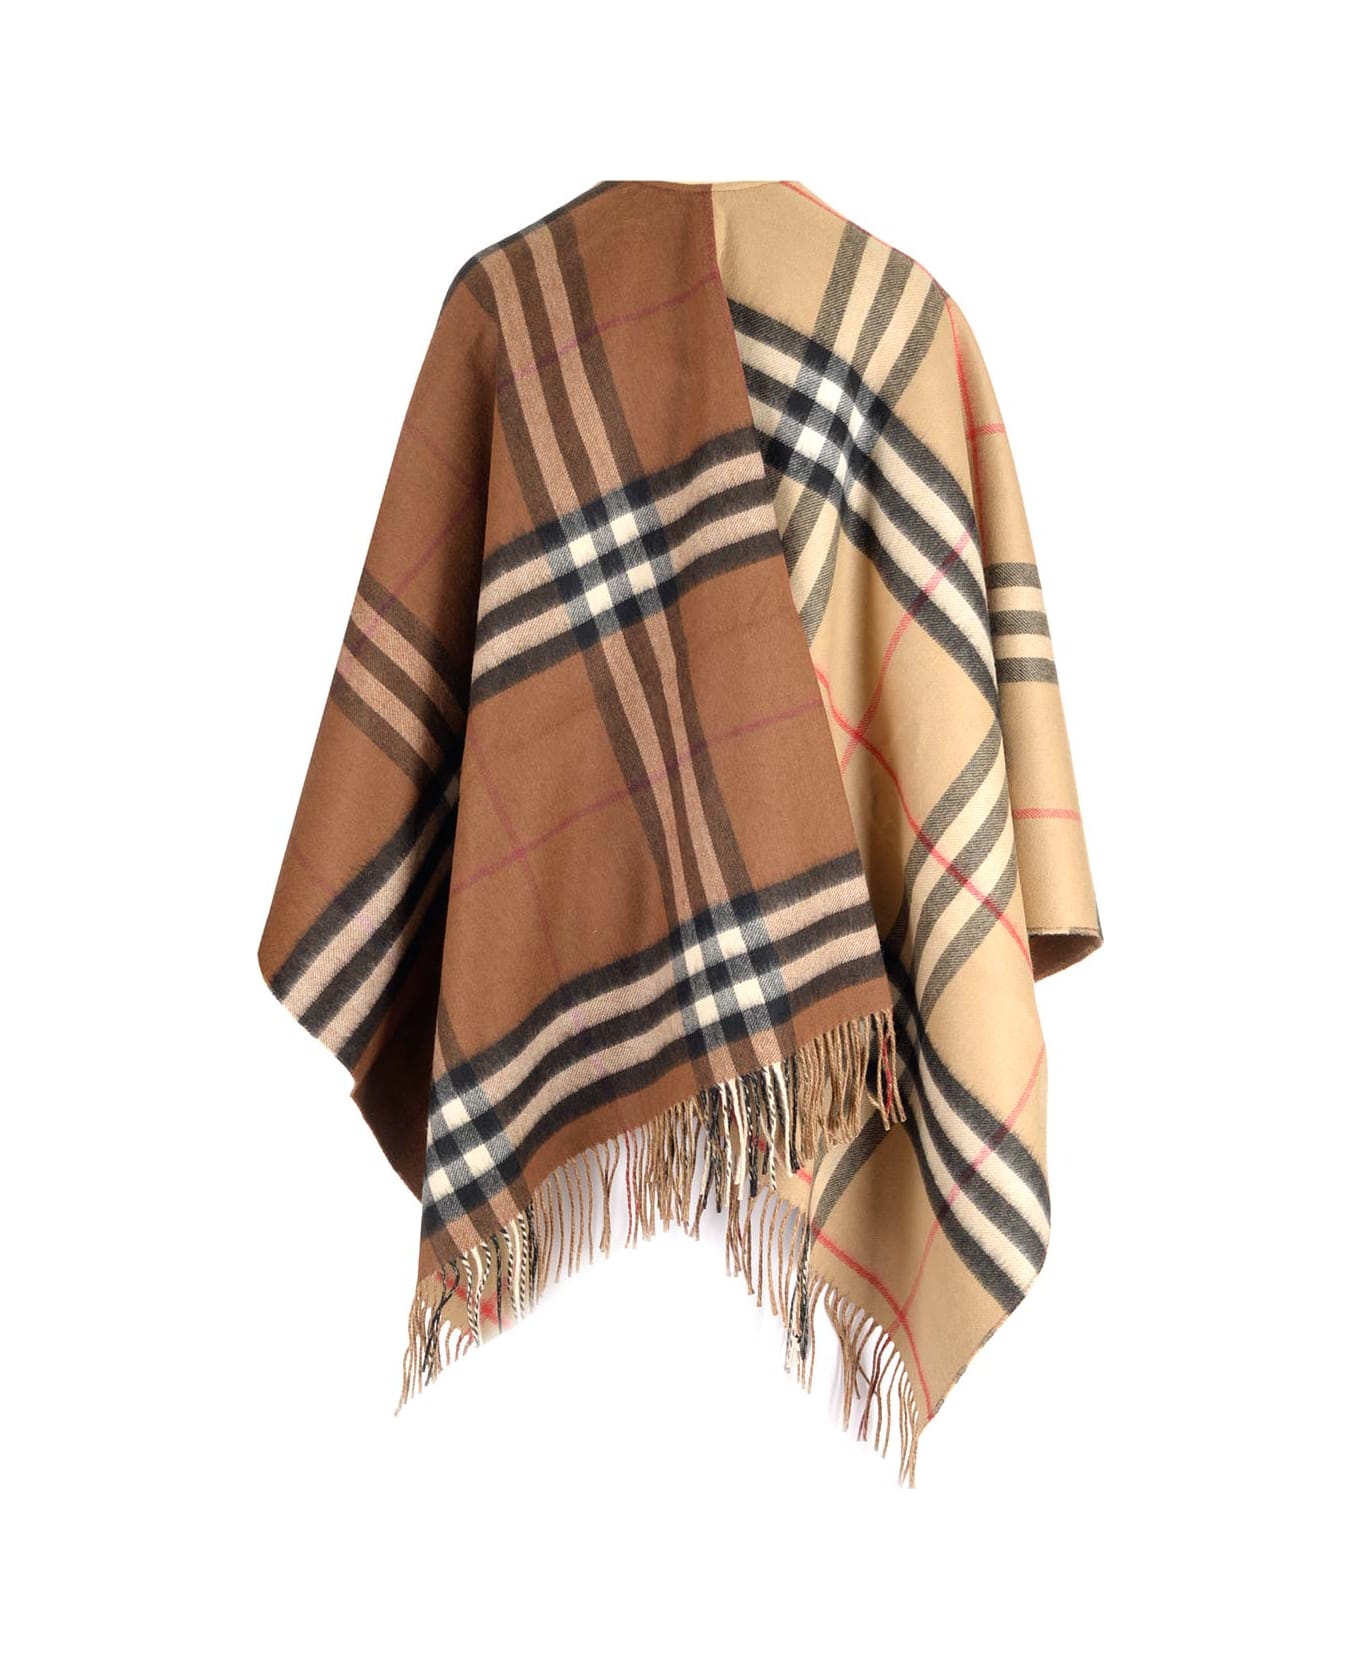 Burberry Wool And Cashmere Cape - Multicolor